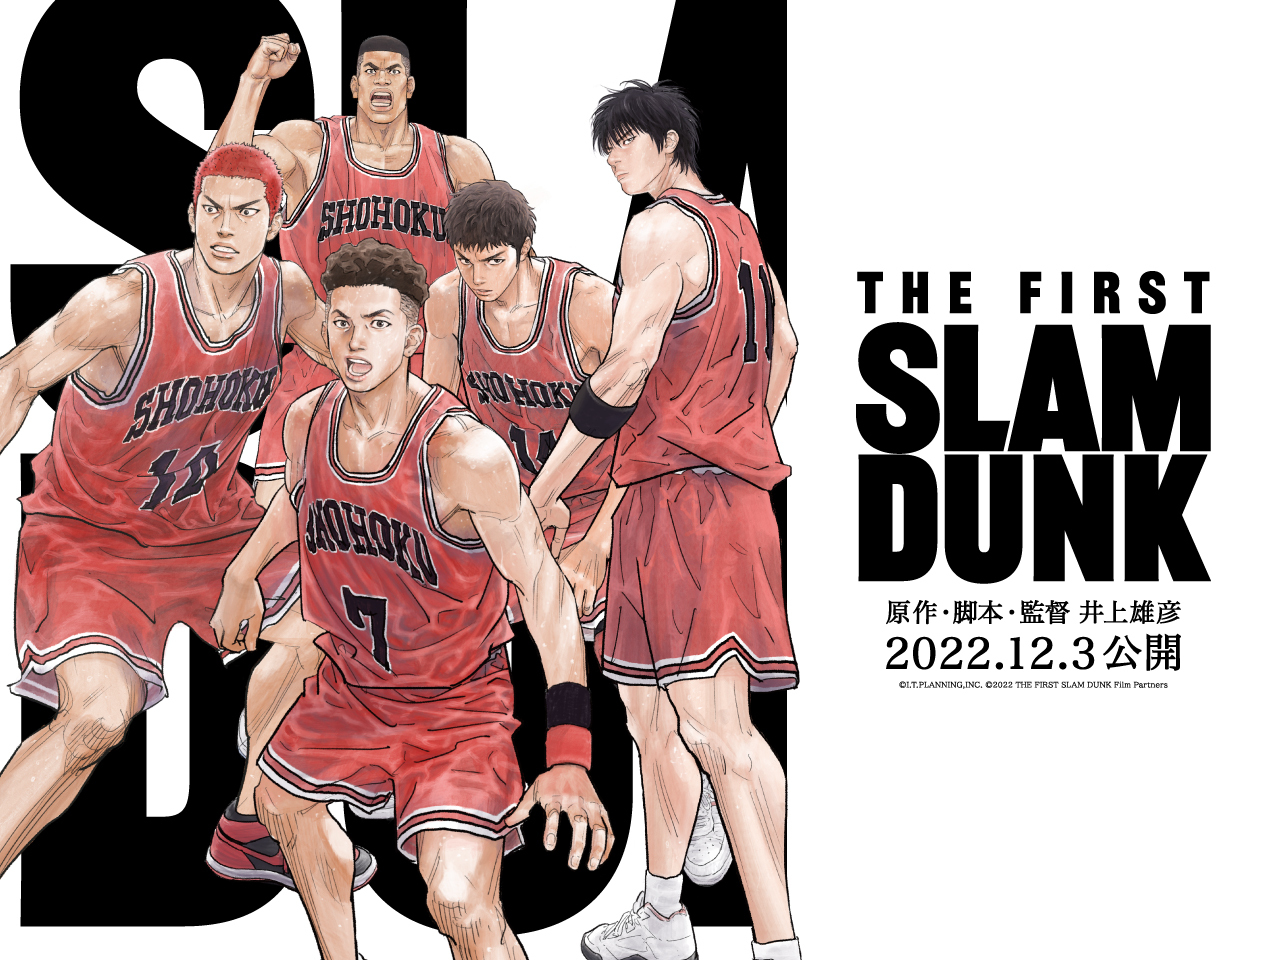 © 2022 THE FIRST SLAM DUNK Film Partners